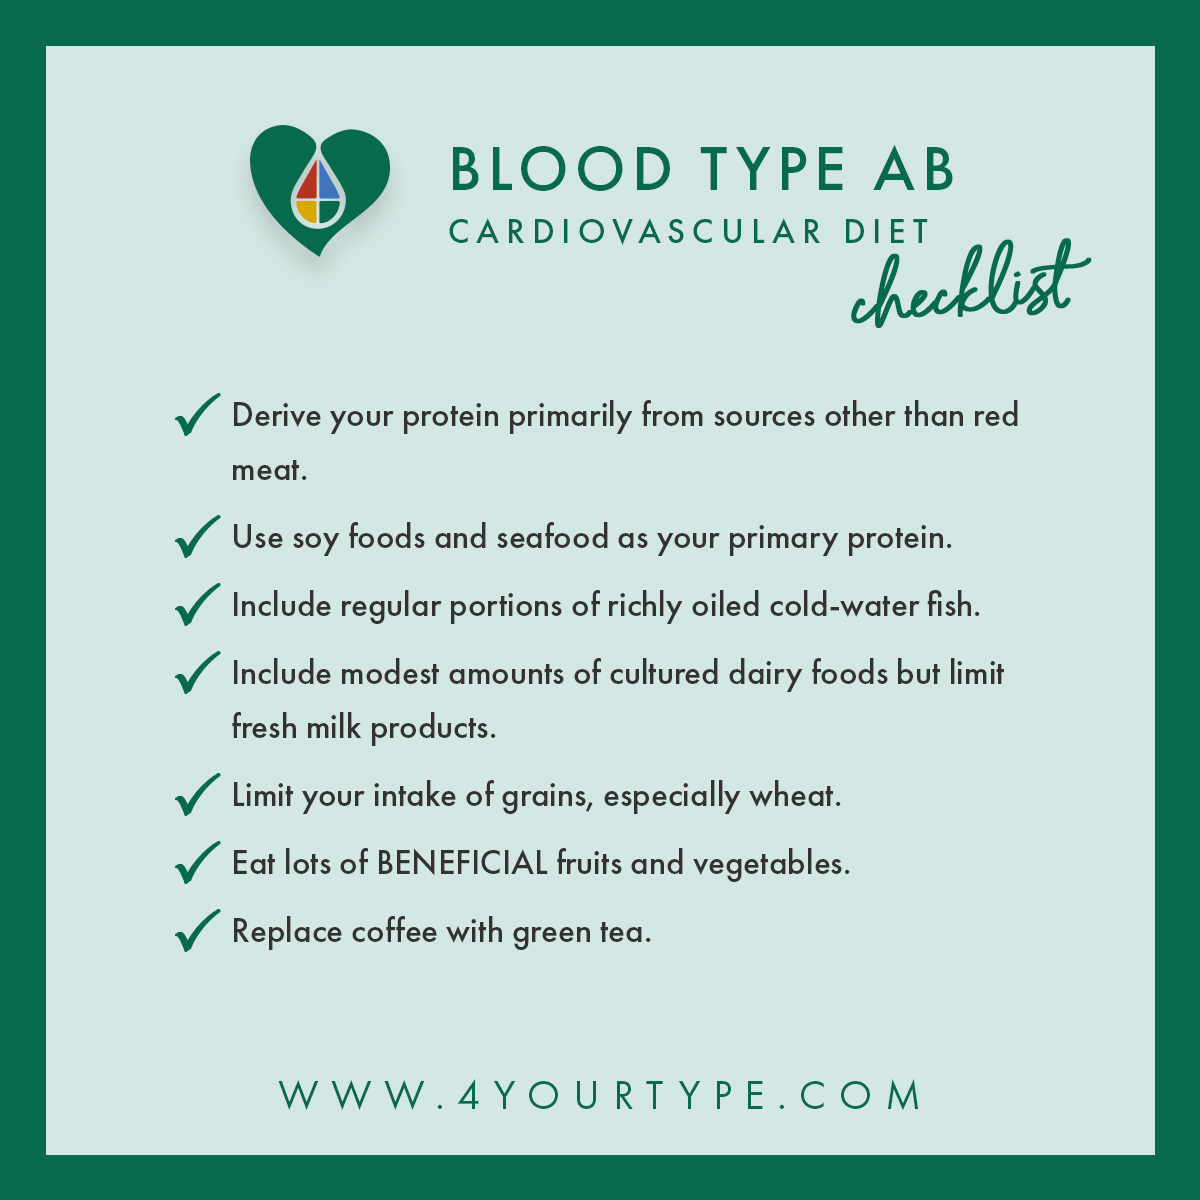 Heart healthy foods blood type checklist AB